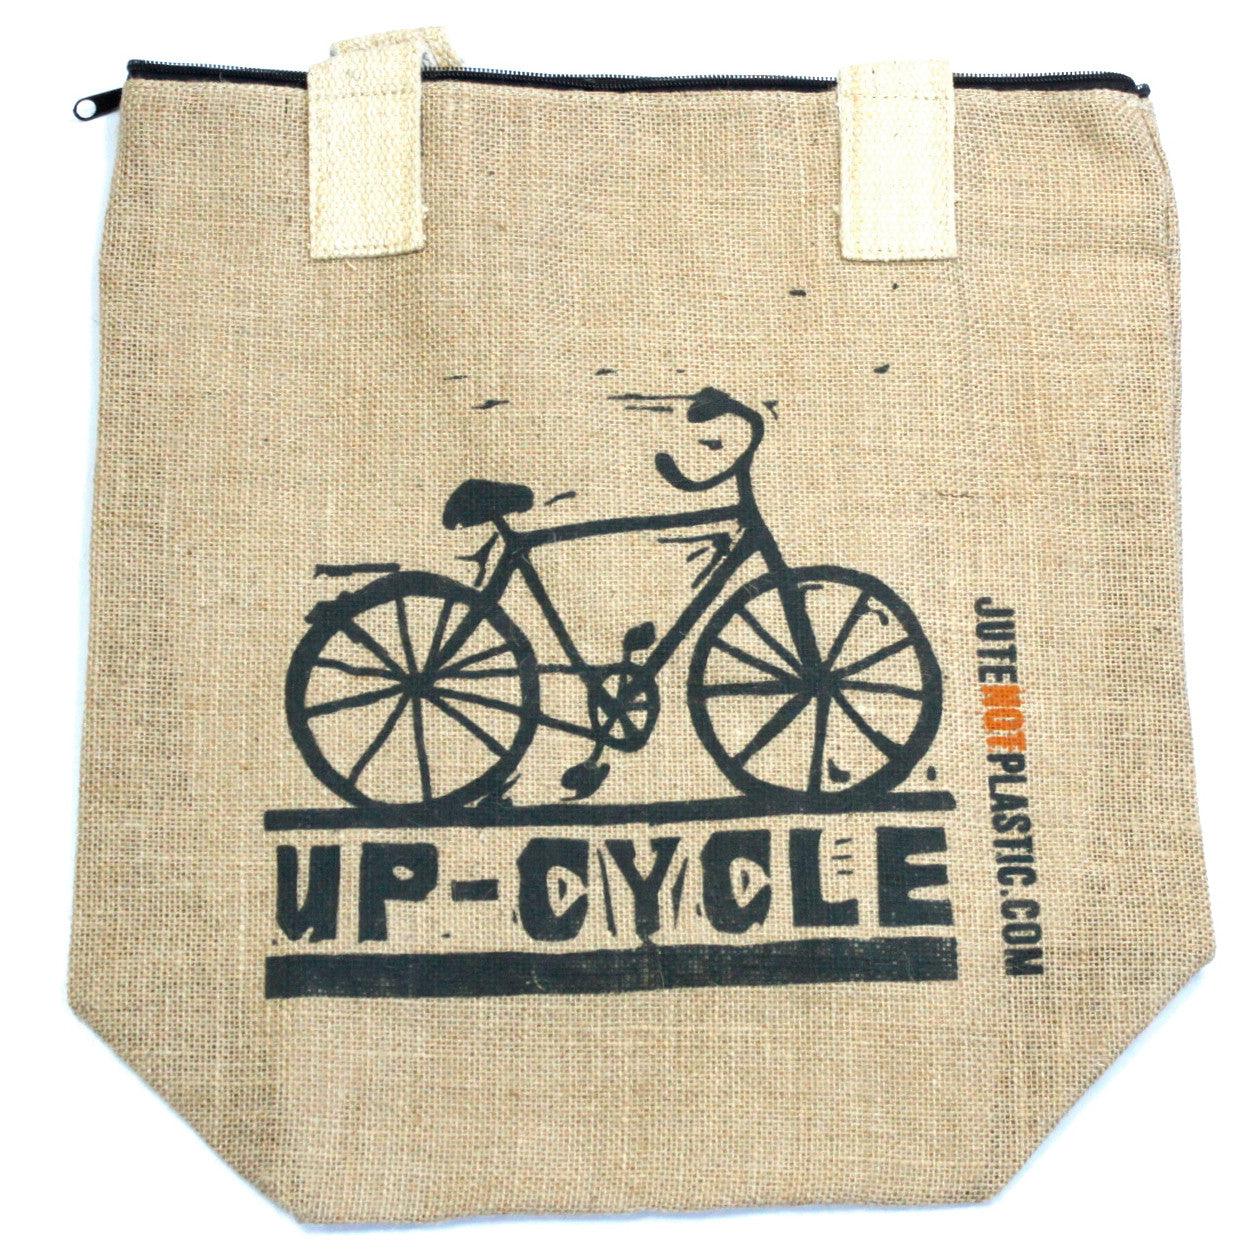 Up Cycle - Eco Jute Bag - DuvetDay.co.uk